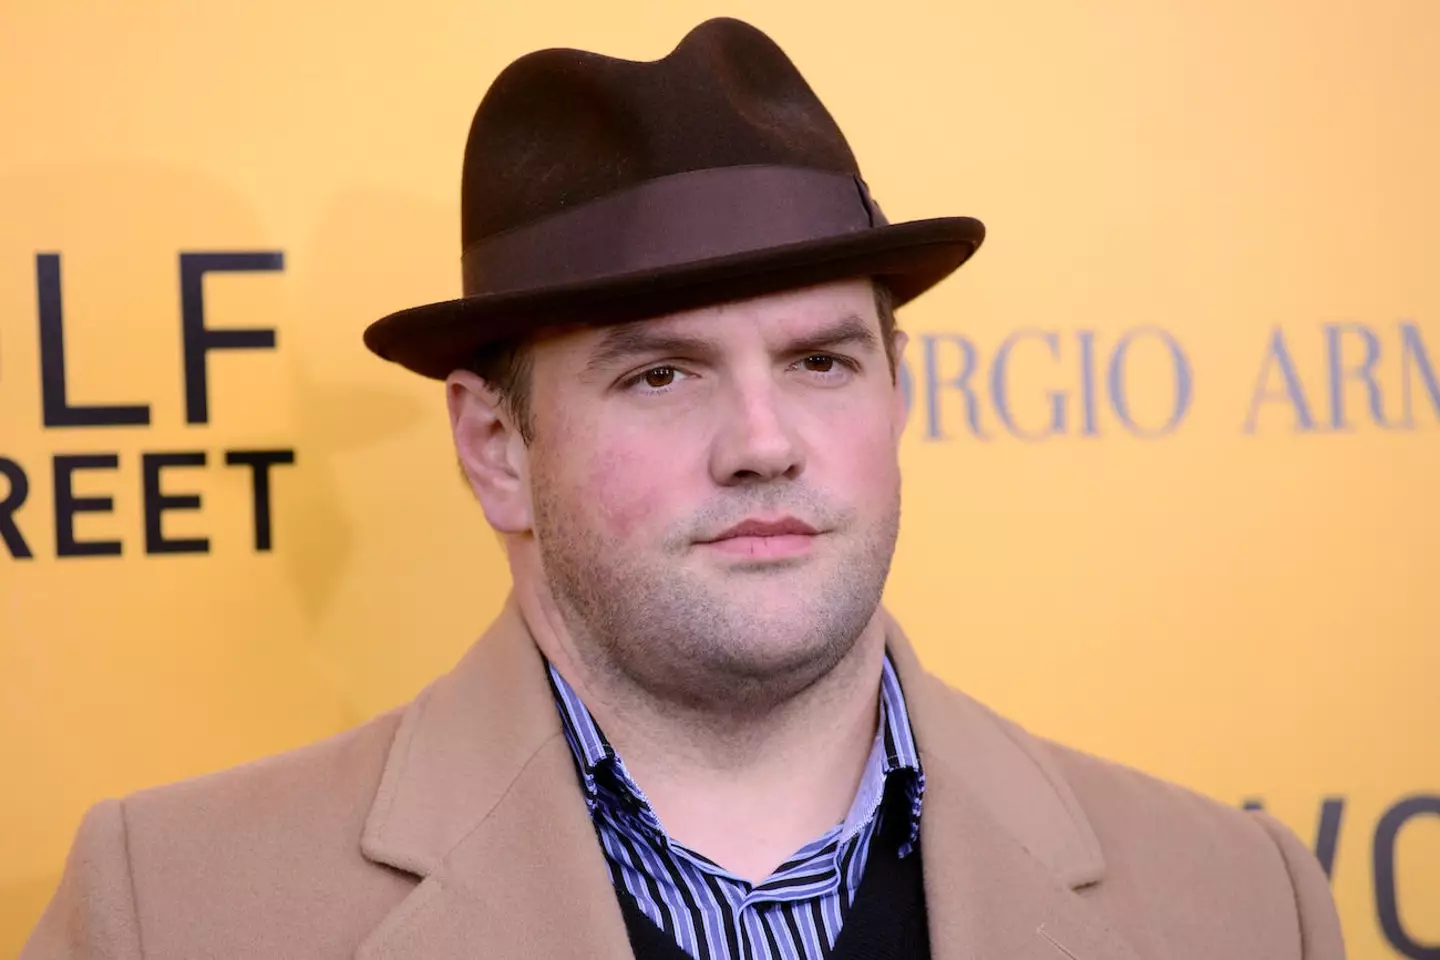 The authentic way Leonardo DiCaprio's The Wolf of Wall Street character managed to snort cocaine off a woman's 'a**hole' was all thanks to helpful co-star Ethan Suplee.